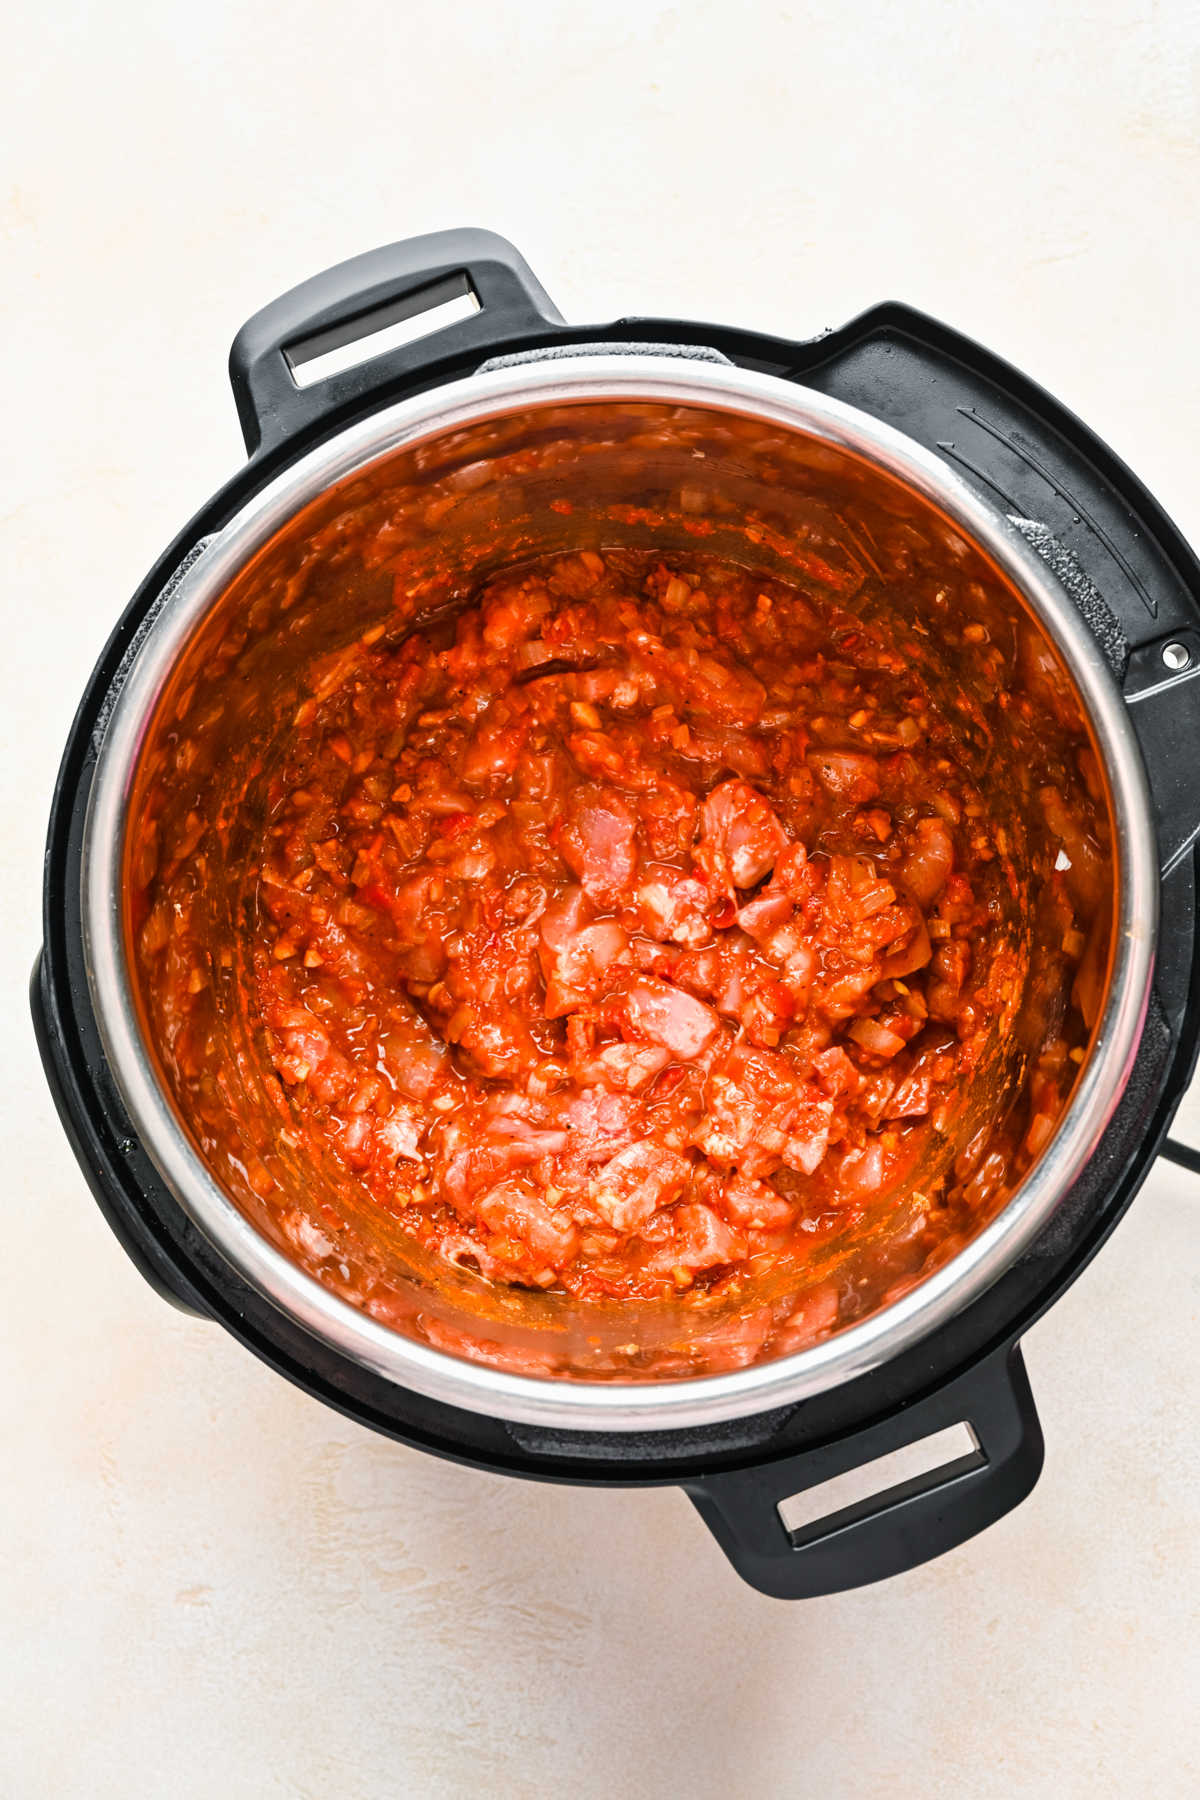 Pieces of chicken in tomato sauce in an instant pot.